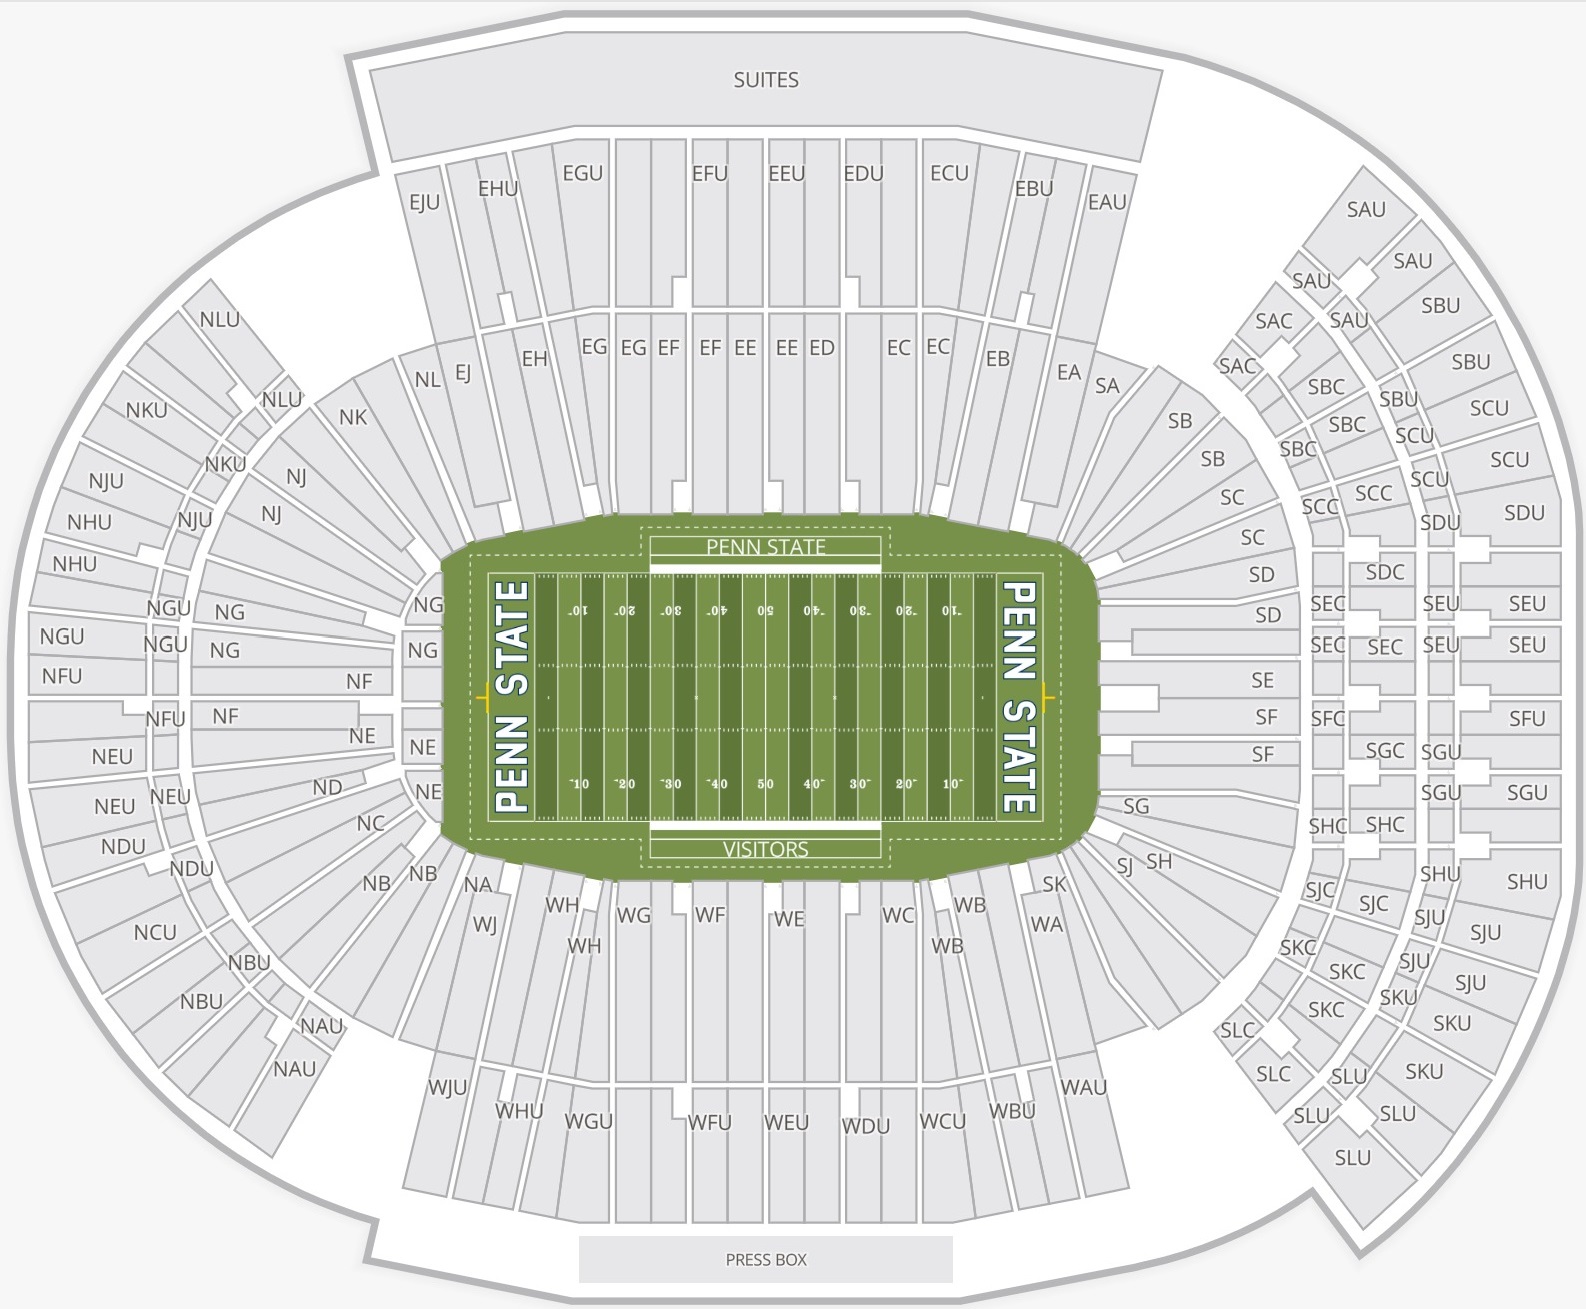 Beaver Football Stadium Seating Chart with Rows and Seat Numbers for Football Games